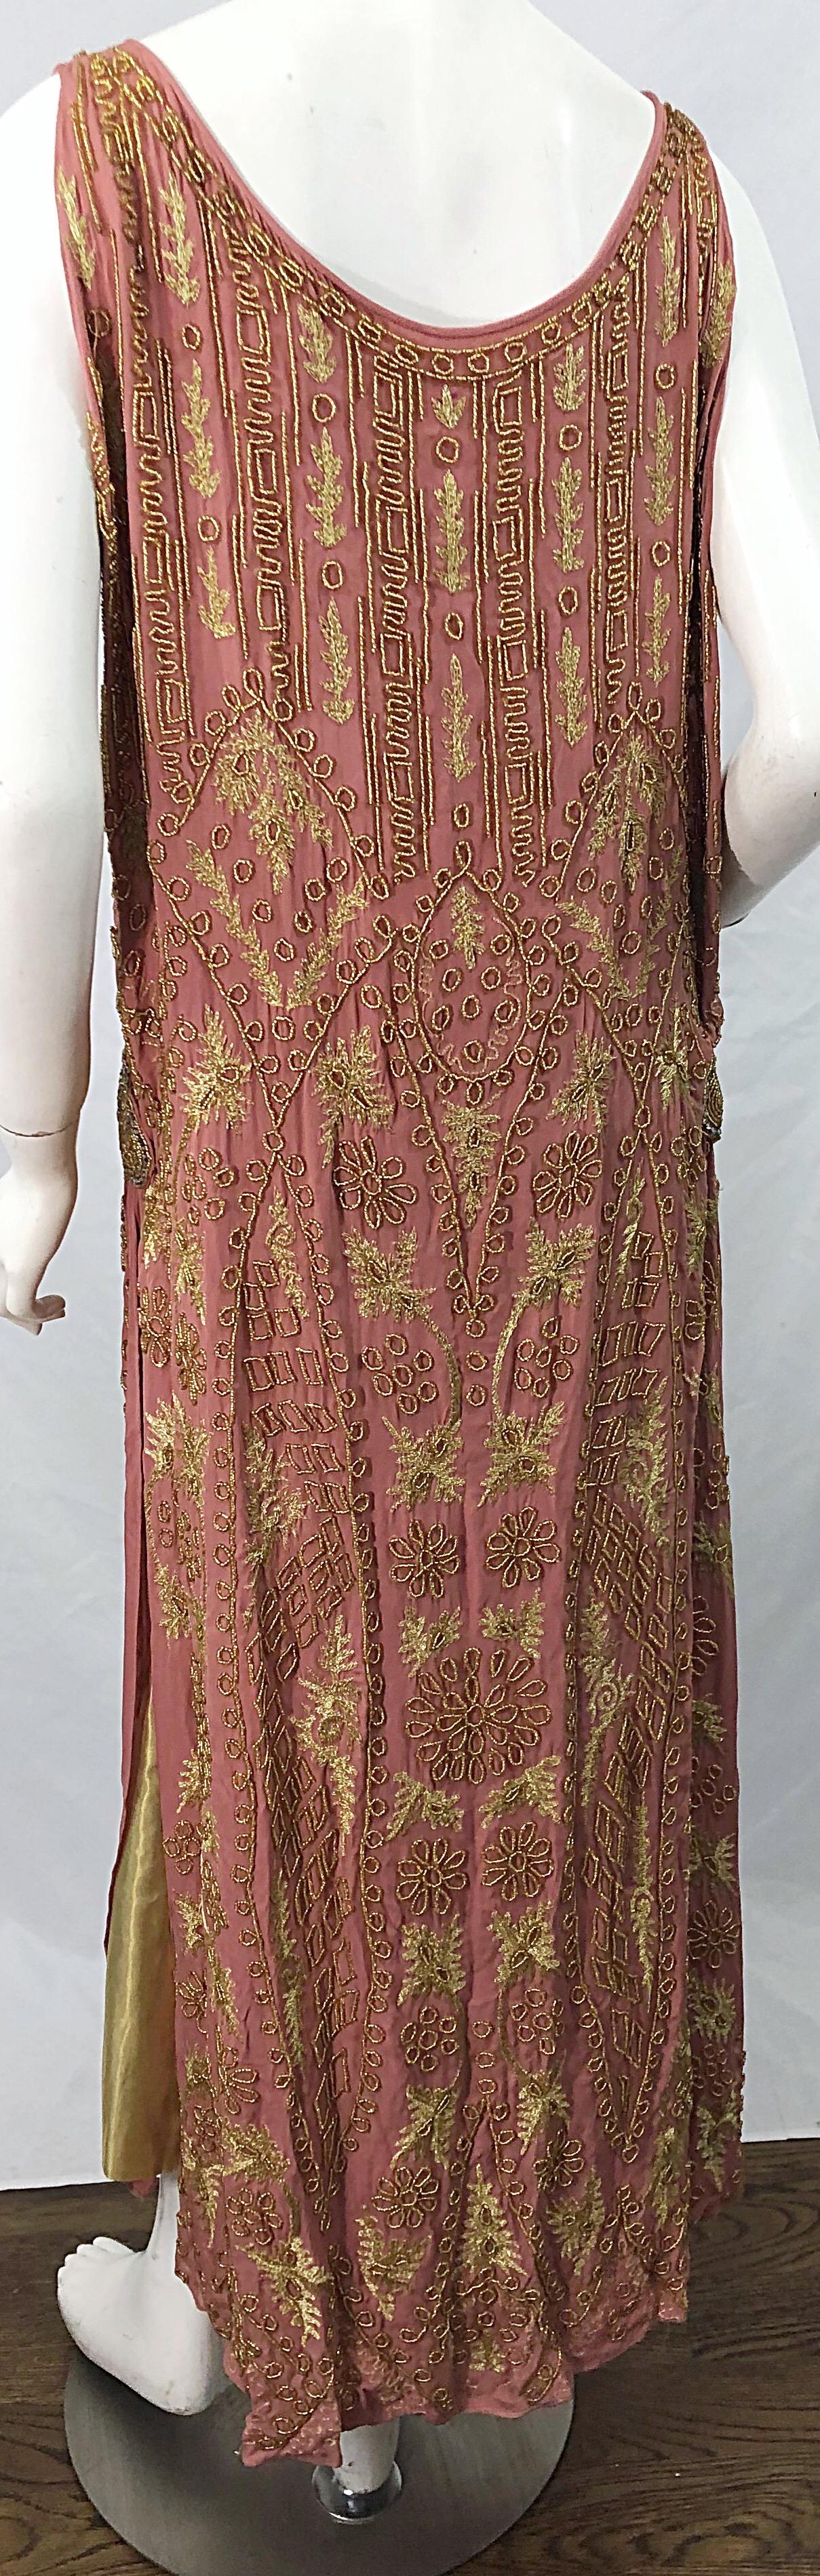 1920s French Couture Pink + Gold Beaded Gatsby Roaring 20s Vintage ...